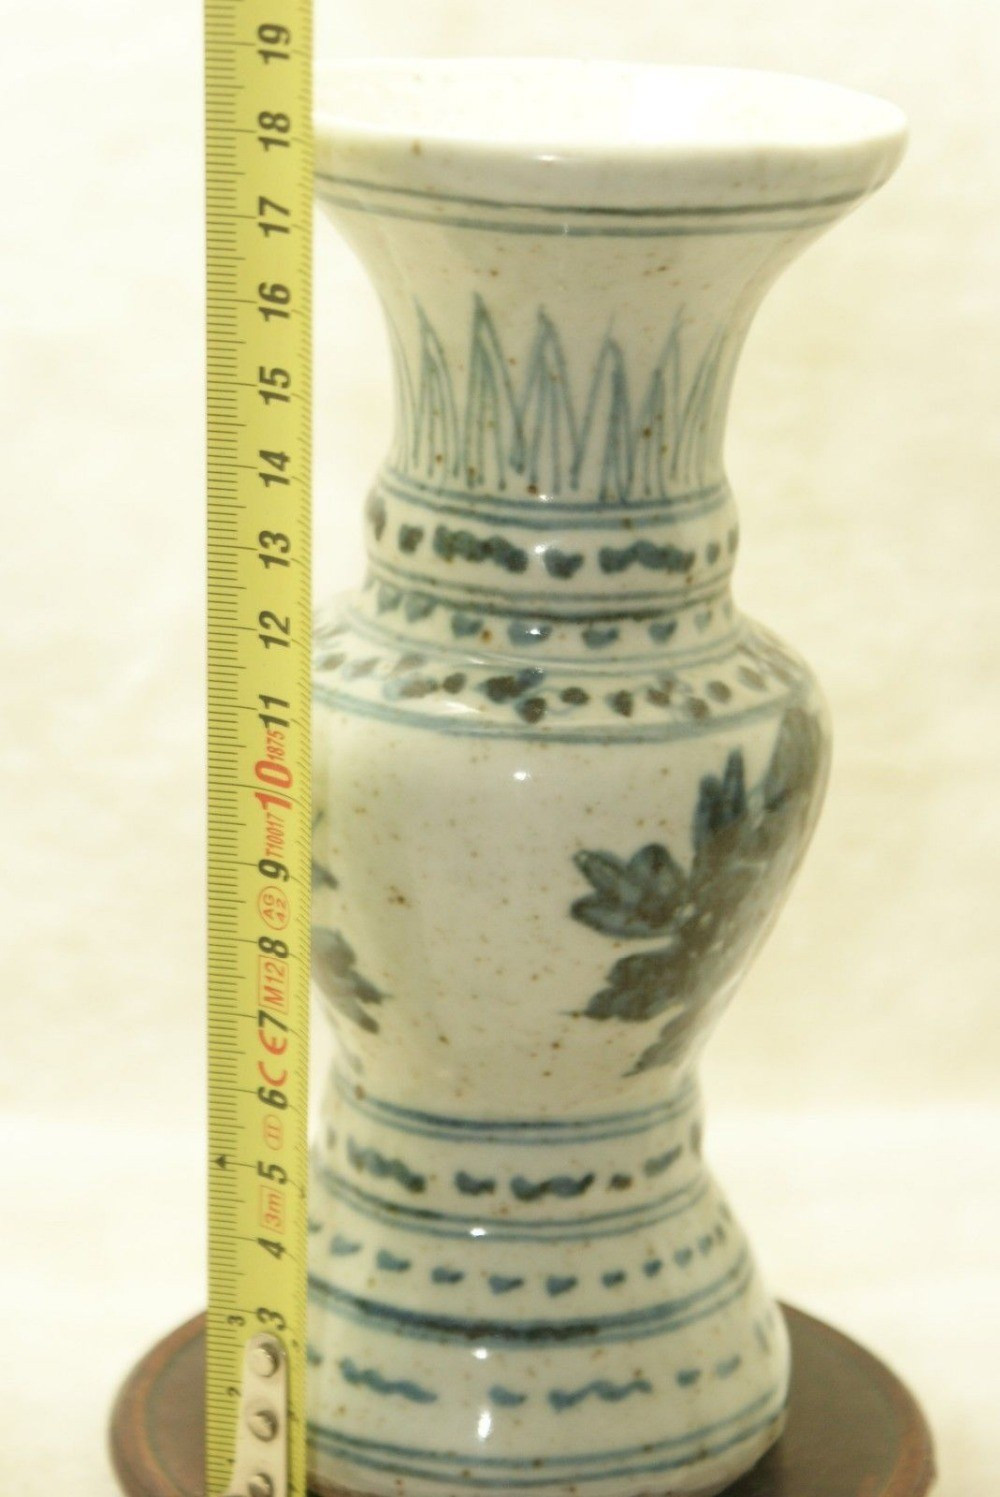 10 Perfect 18 Inch Vases In Bulk 2024 free download 18 inch vases in bulk of ac297c29afree shipping chinese antique porcelain vases and porcelain vases in 289f 289a 289b 289c 289d 289e